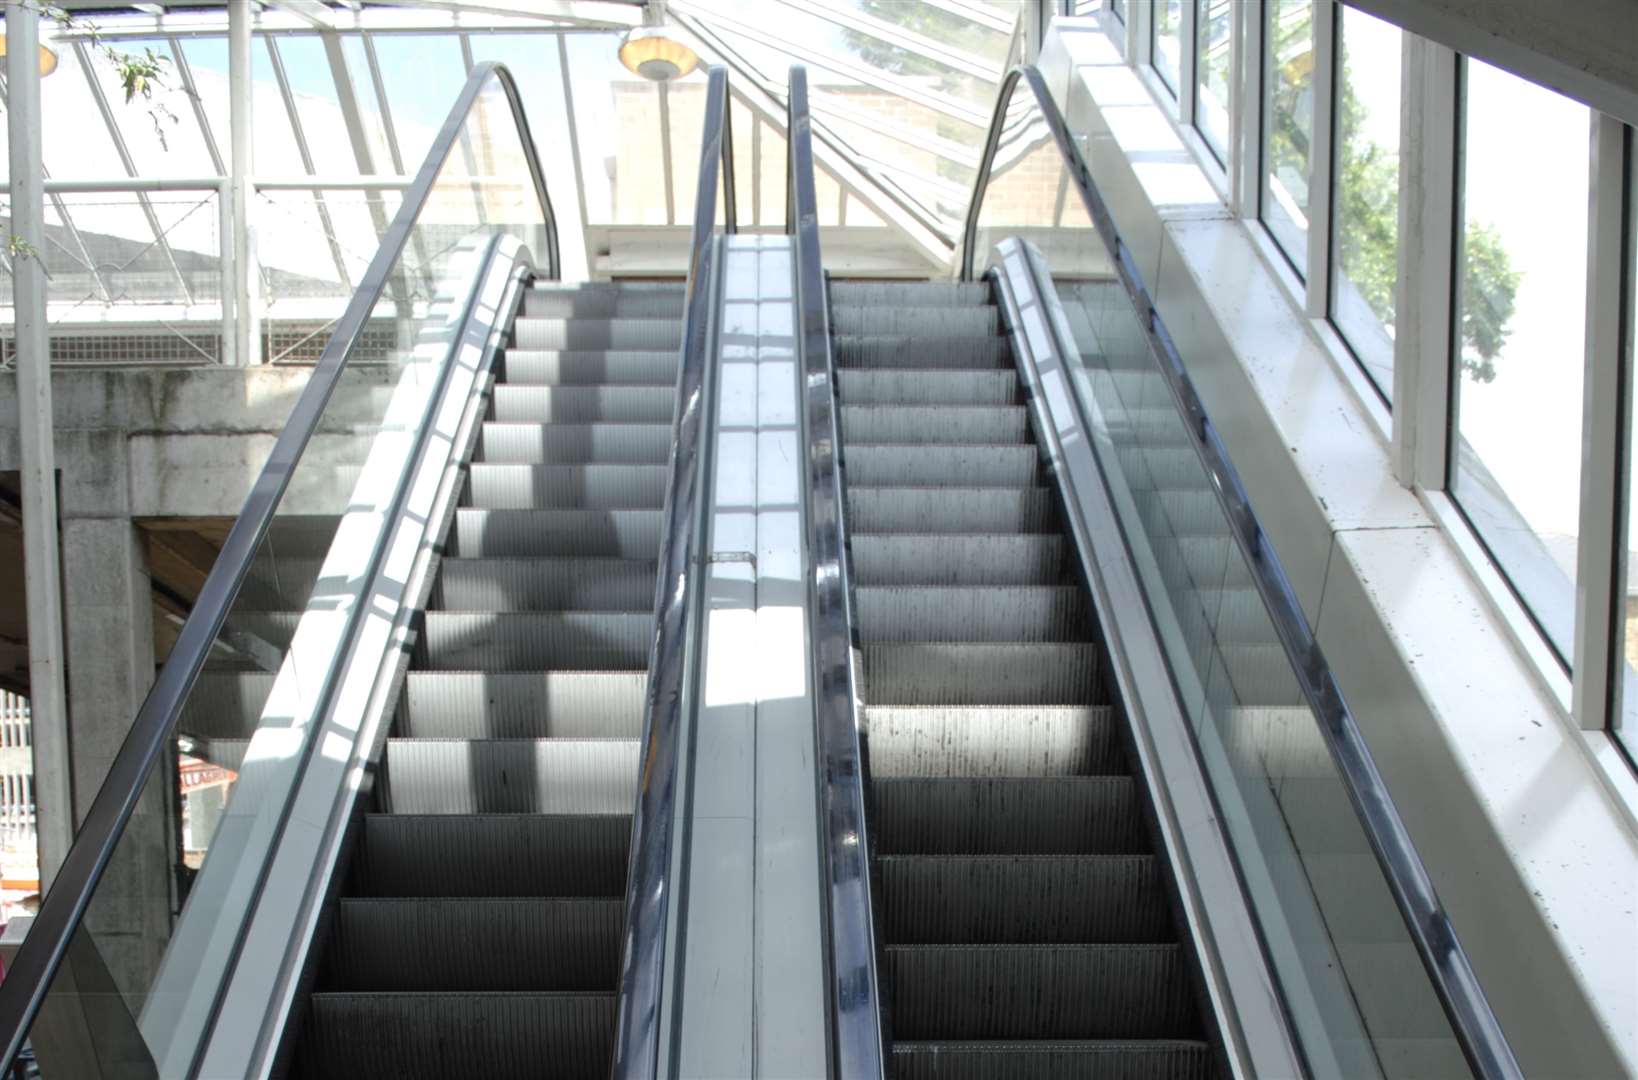 The escalators linking The Mall Shopping Centre to Sainsburys at Romney Place. Photography by Matthew Walker (36447518)